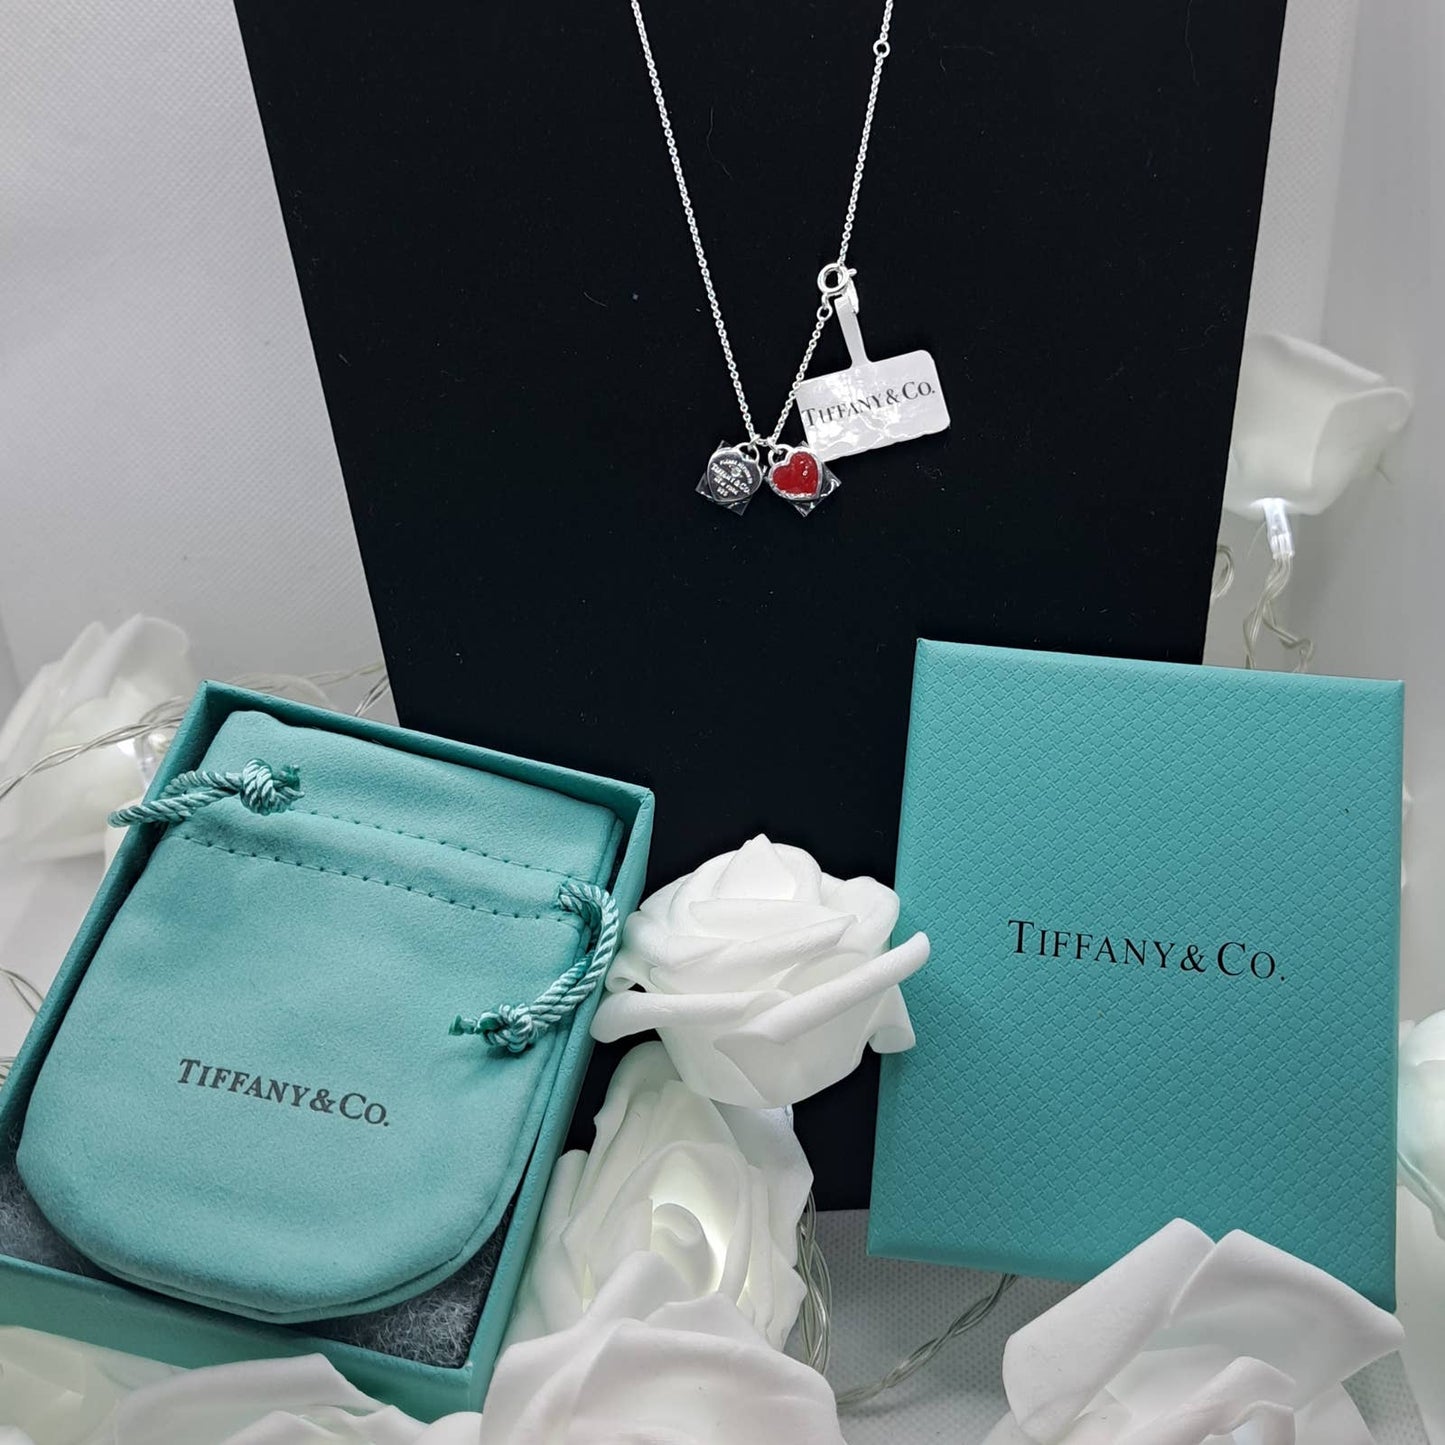 NEW Tiffany & Co. Return to Tiffany Red Double Heart Tag Pendant in Silver with Tiffany bag and box